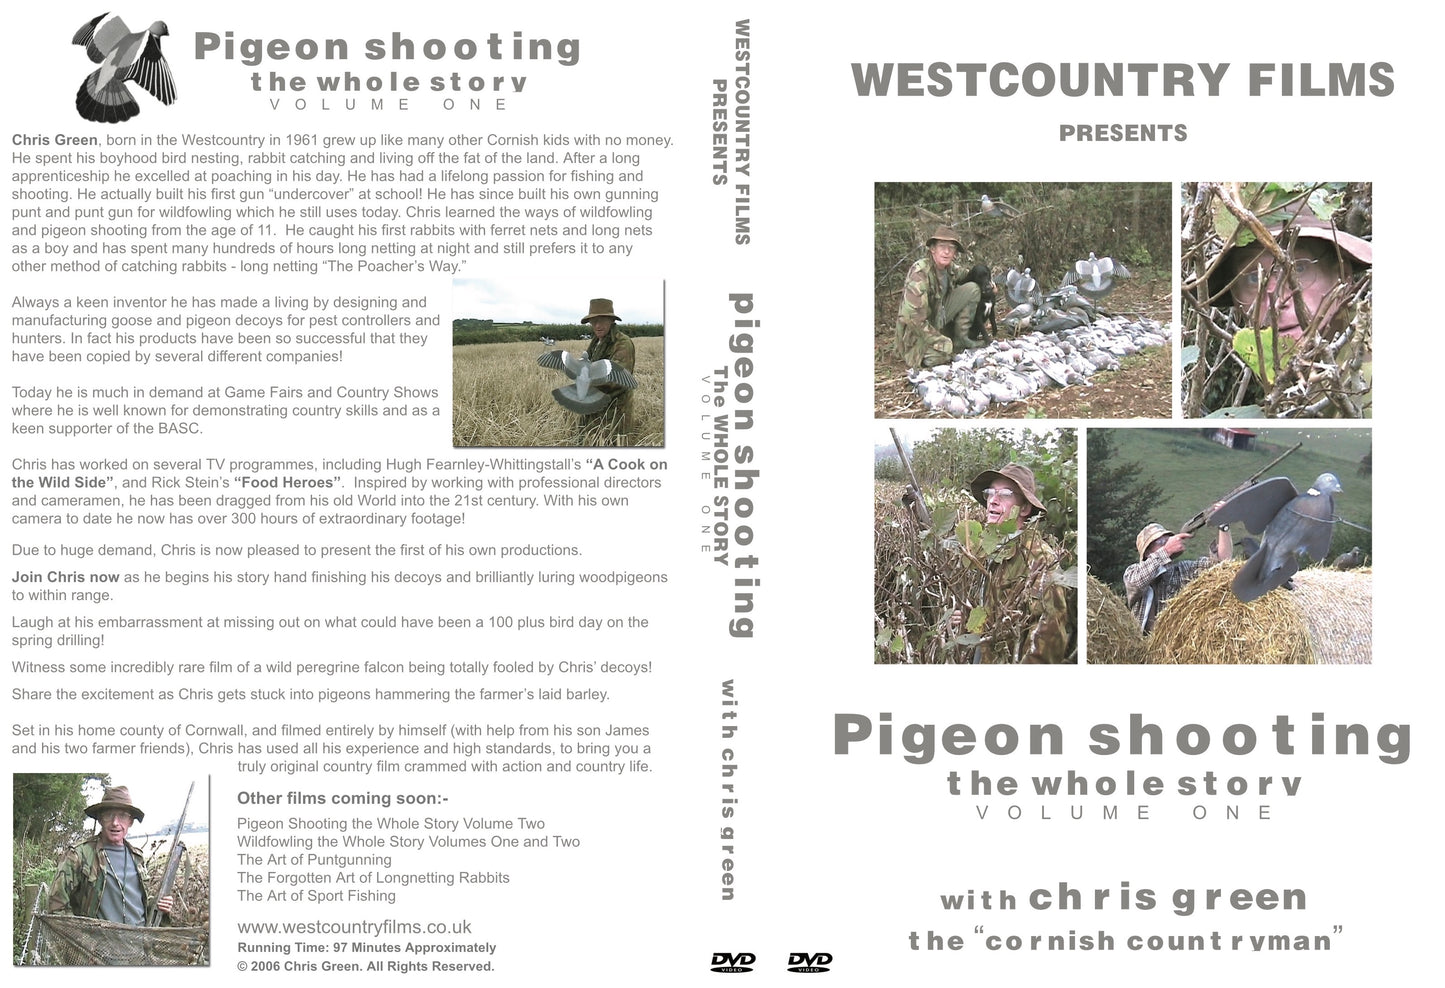 Pigeon Shooting ‘The Whole Story’ Volume One